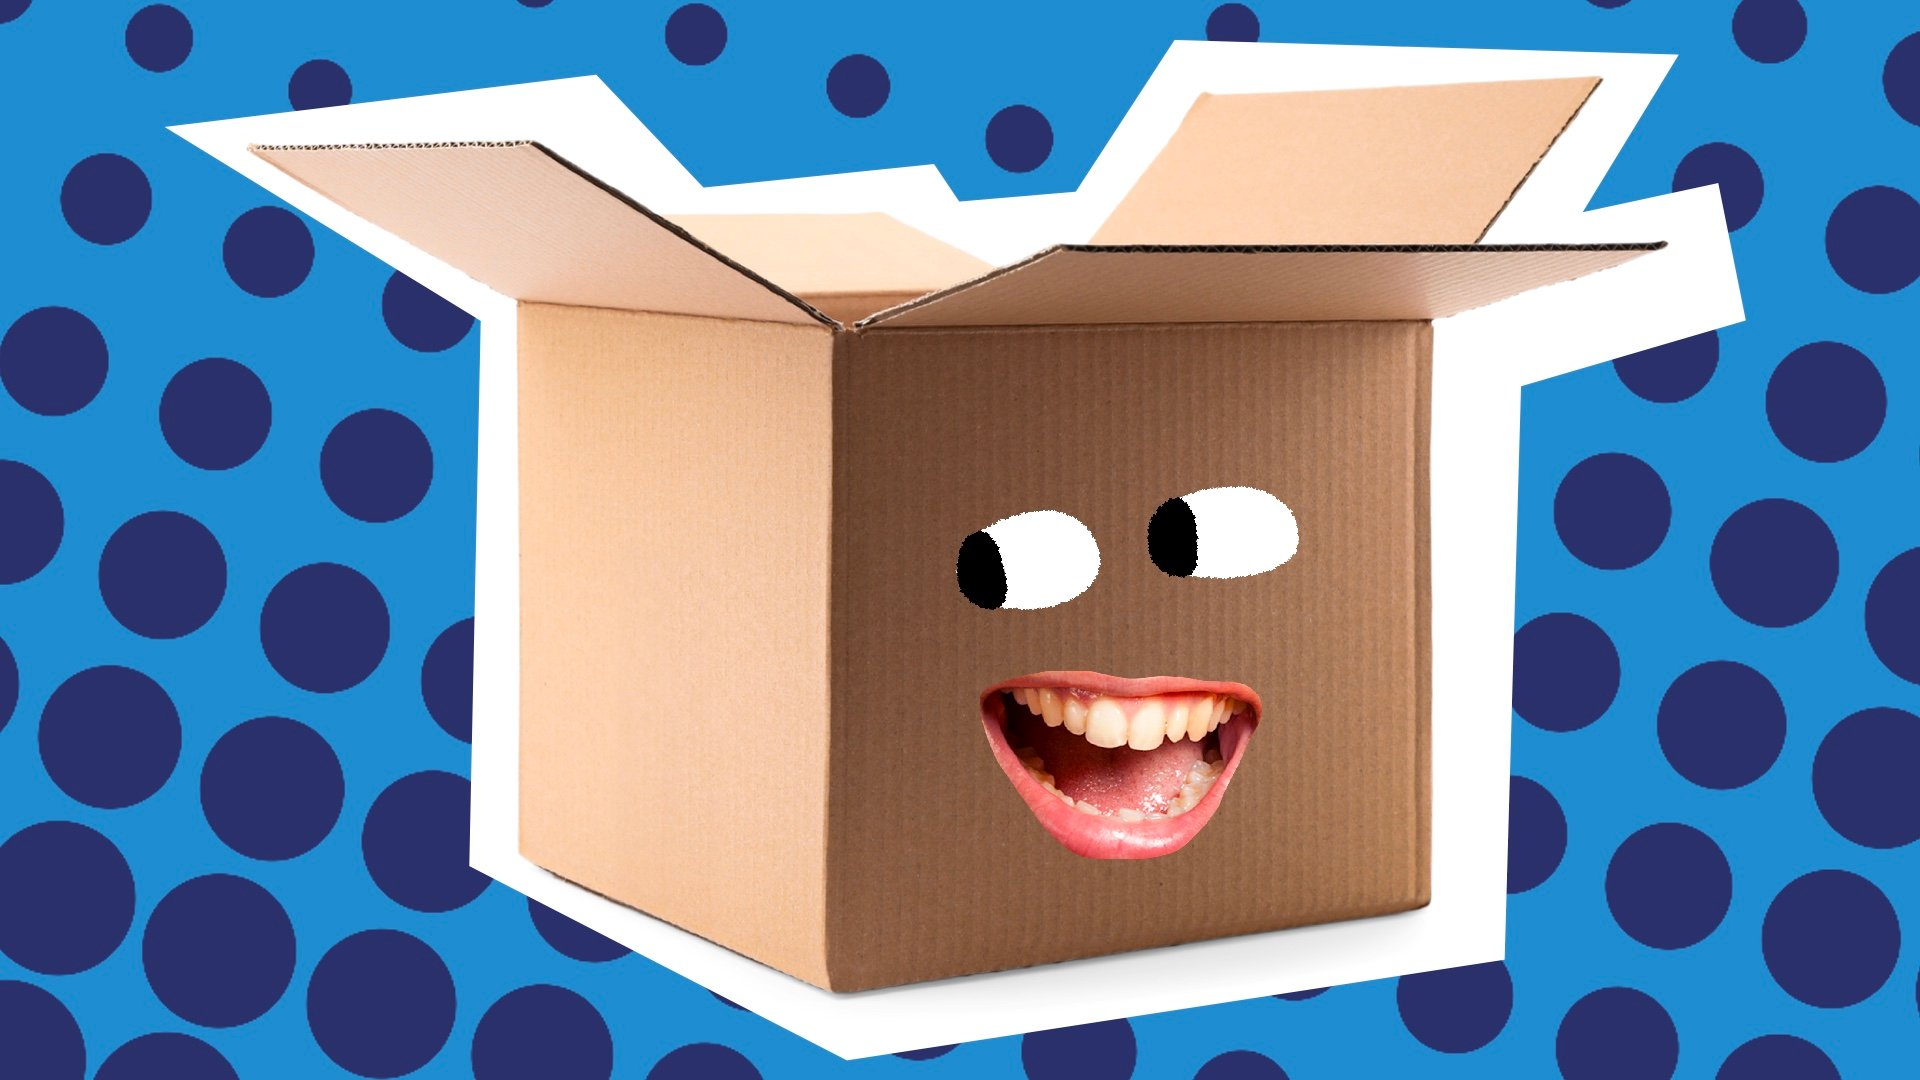 A laughing box